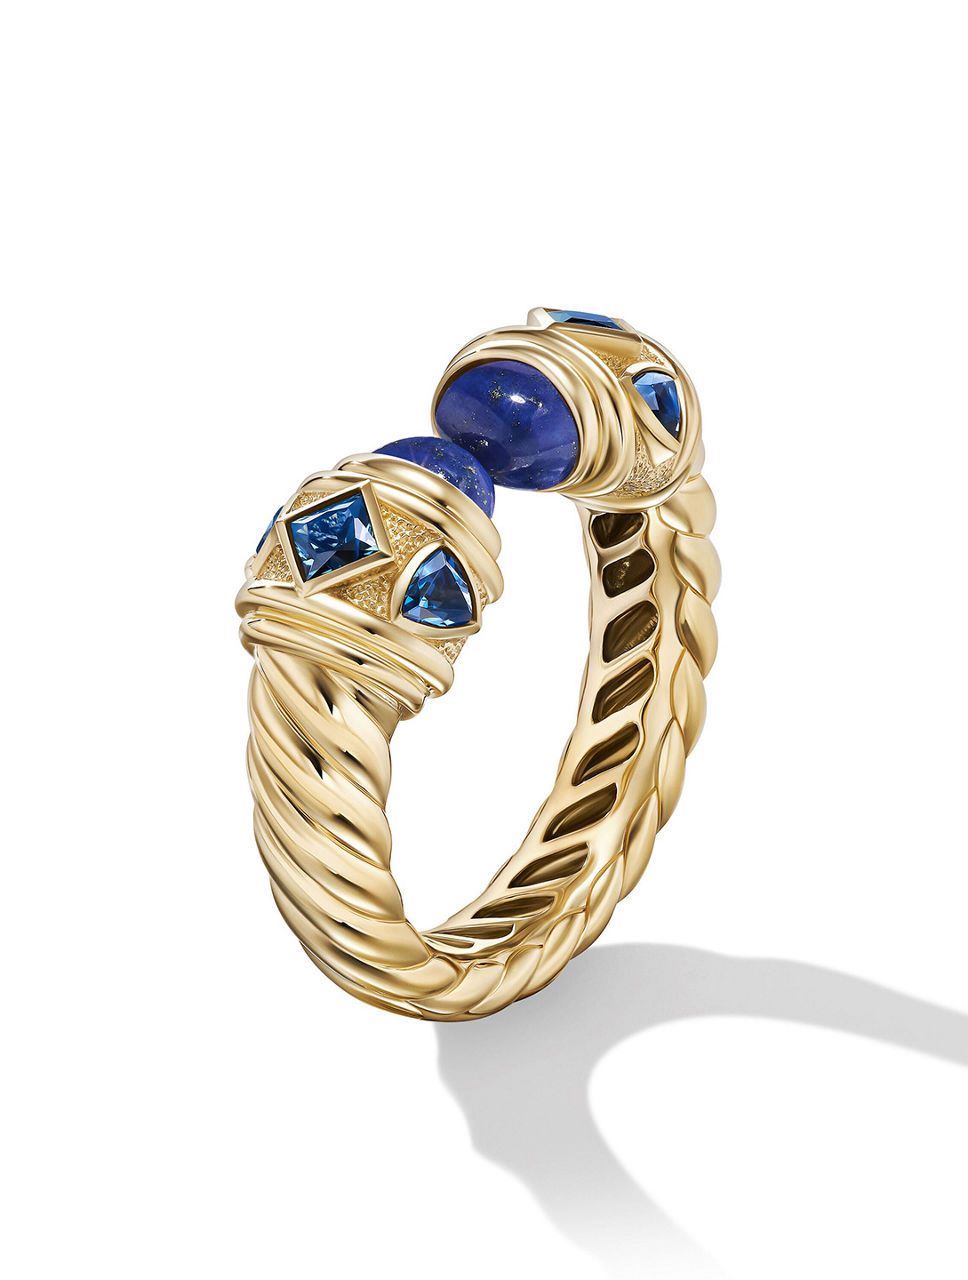 Renaissance® Color Ring 18k Yellow Gold With Lapis And Hampton Blue Topaz